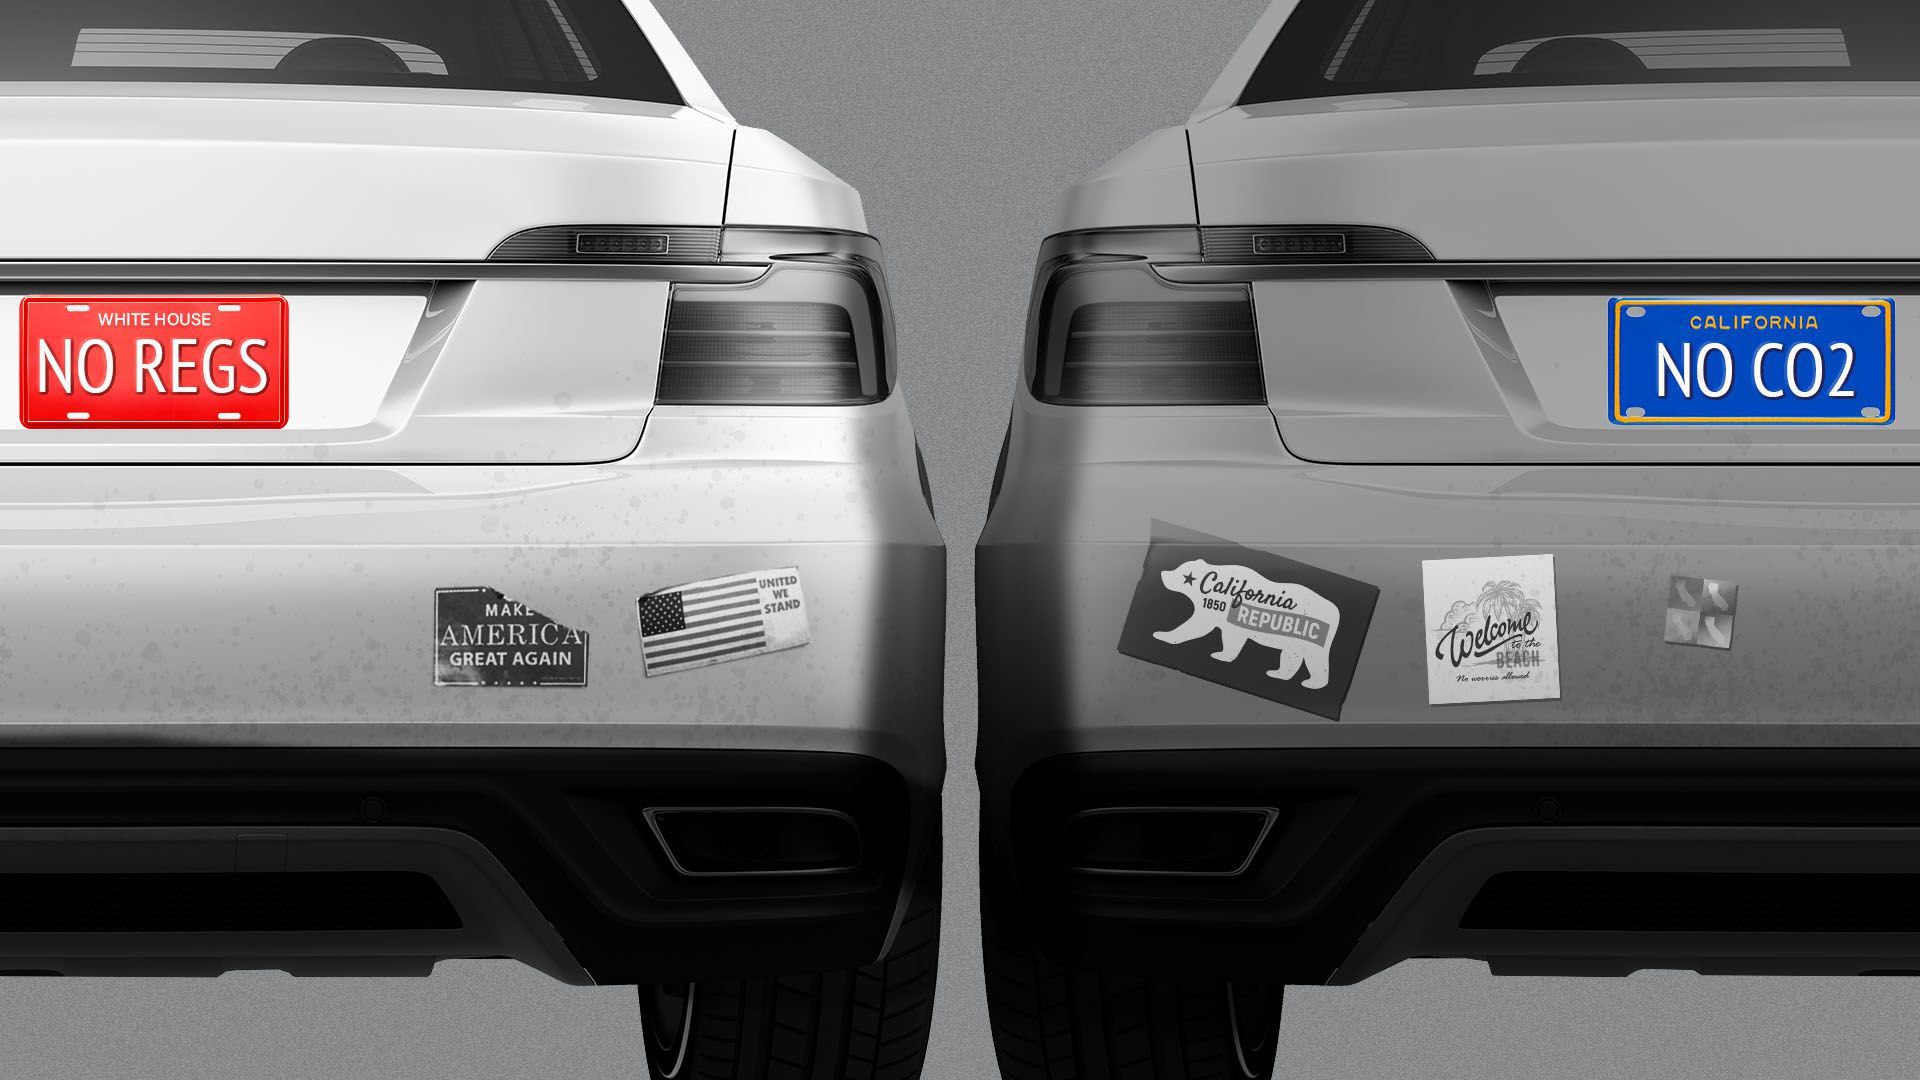 Illustration of two cars with varying bumper stickers arguing for or against carbon emissions and mileage rules 